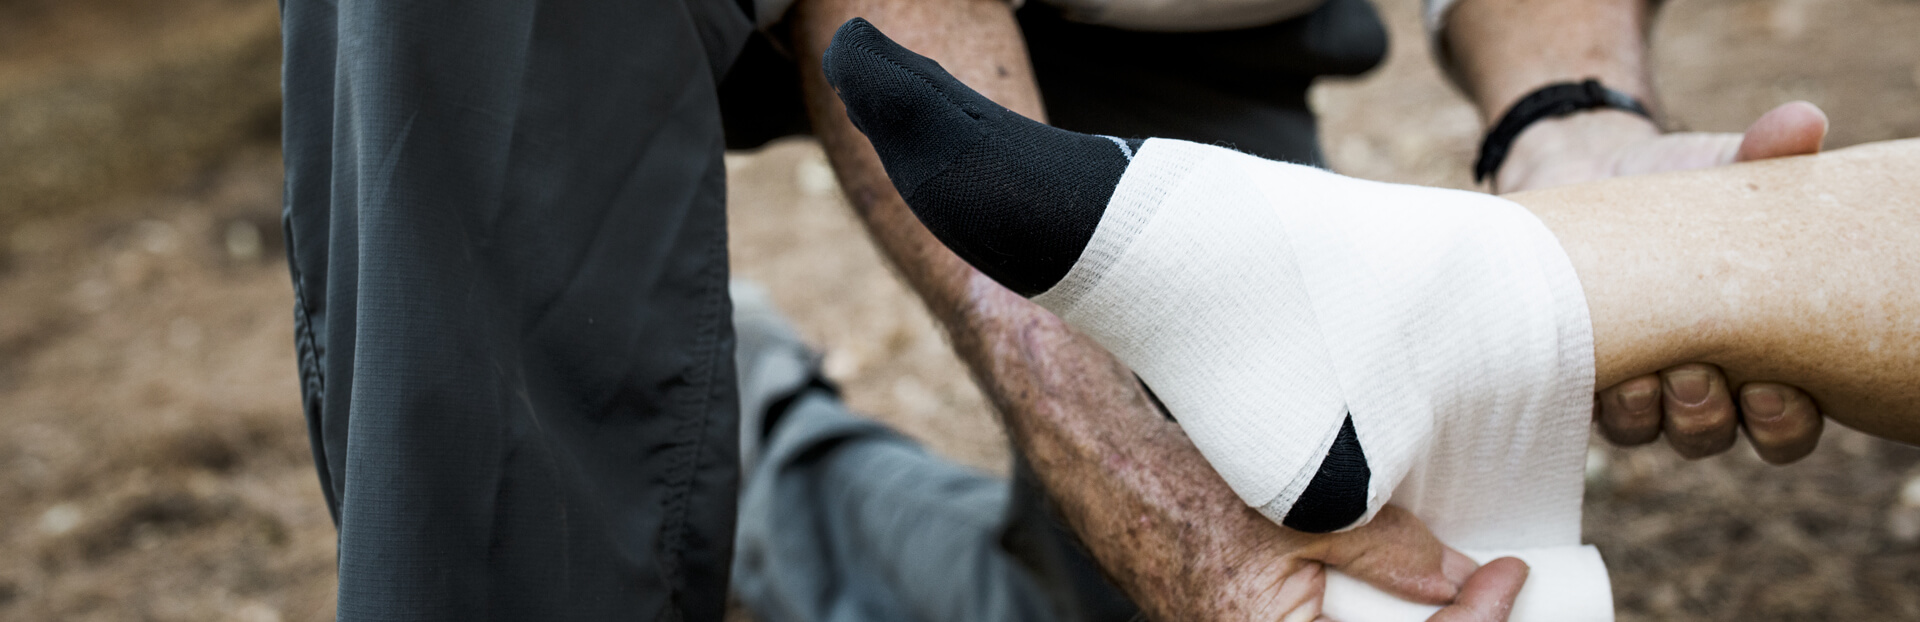 bandage being wrapped round an ankle injury